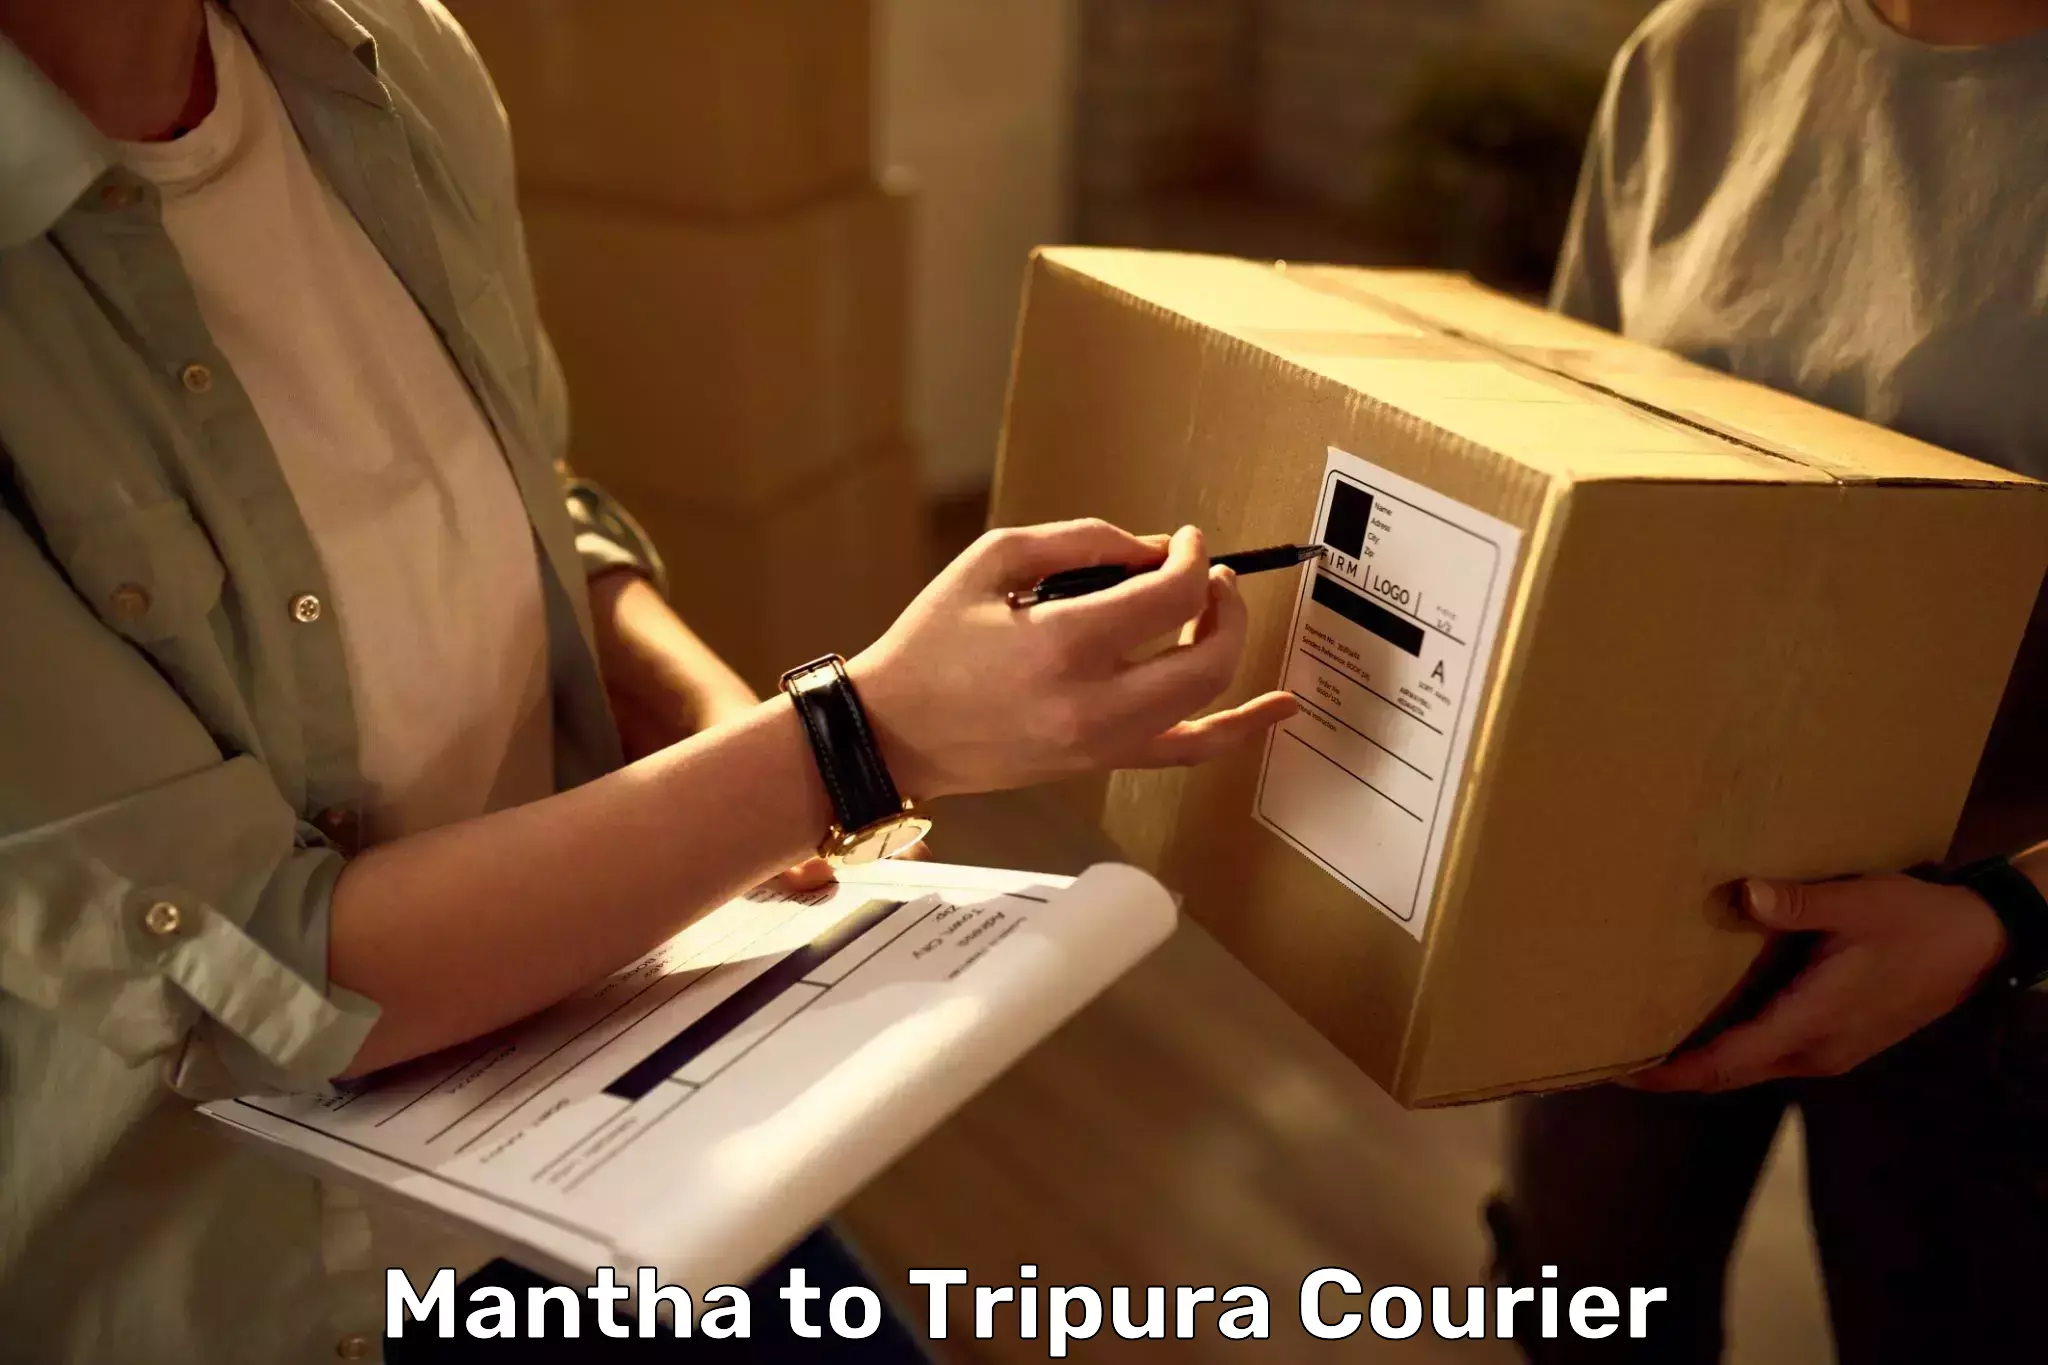 Online luggage shipping booking Mantha to Udaipur Tripura